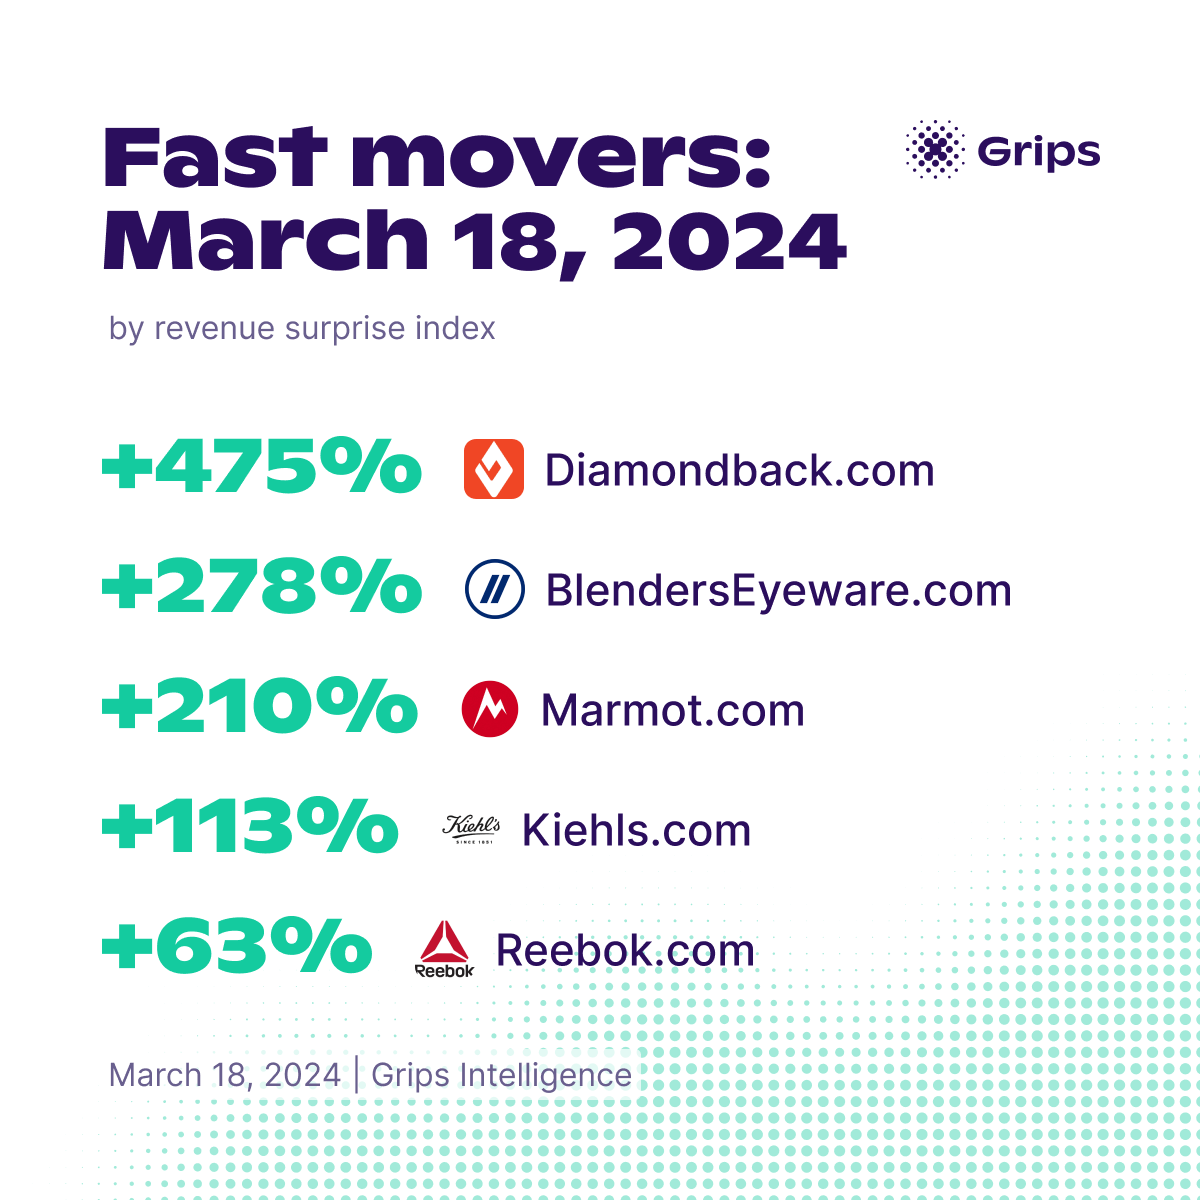 fast-movers e-commerce March 18 2024 Grips Intelligence